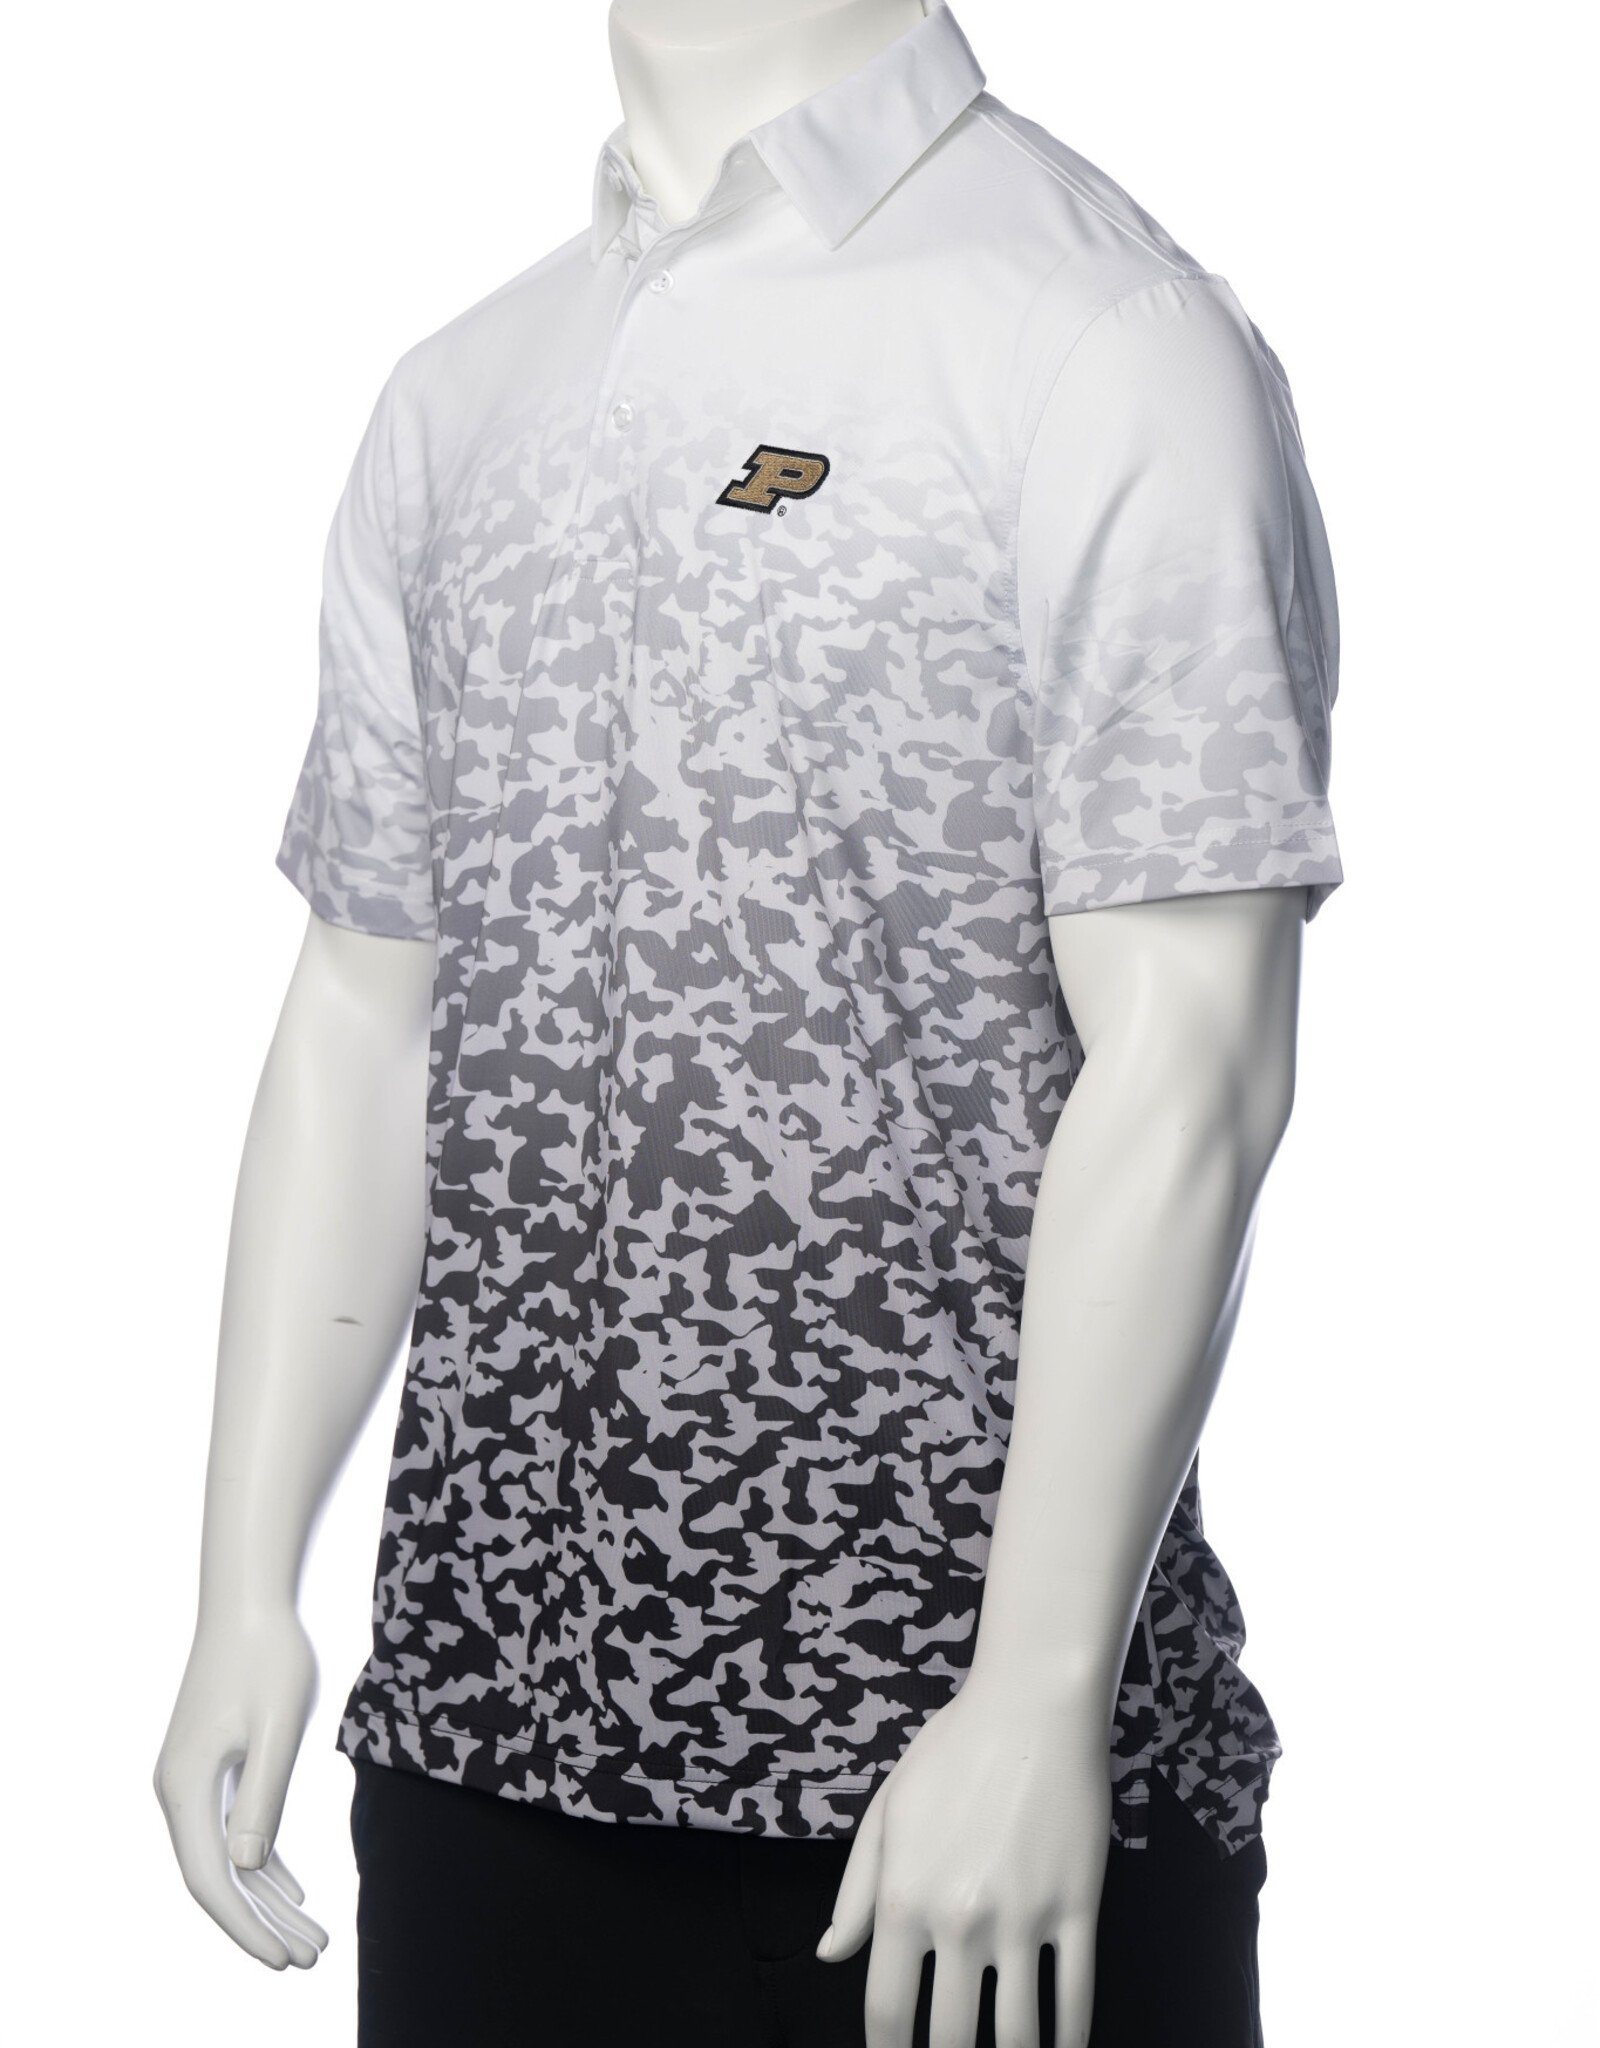 PURDUE COLLECTION PC  "THE HERO" POLO